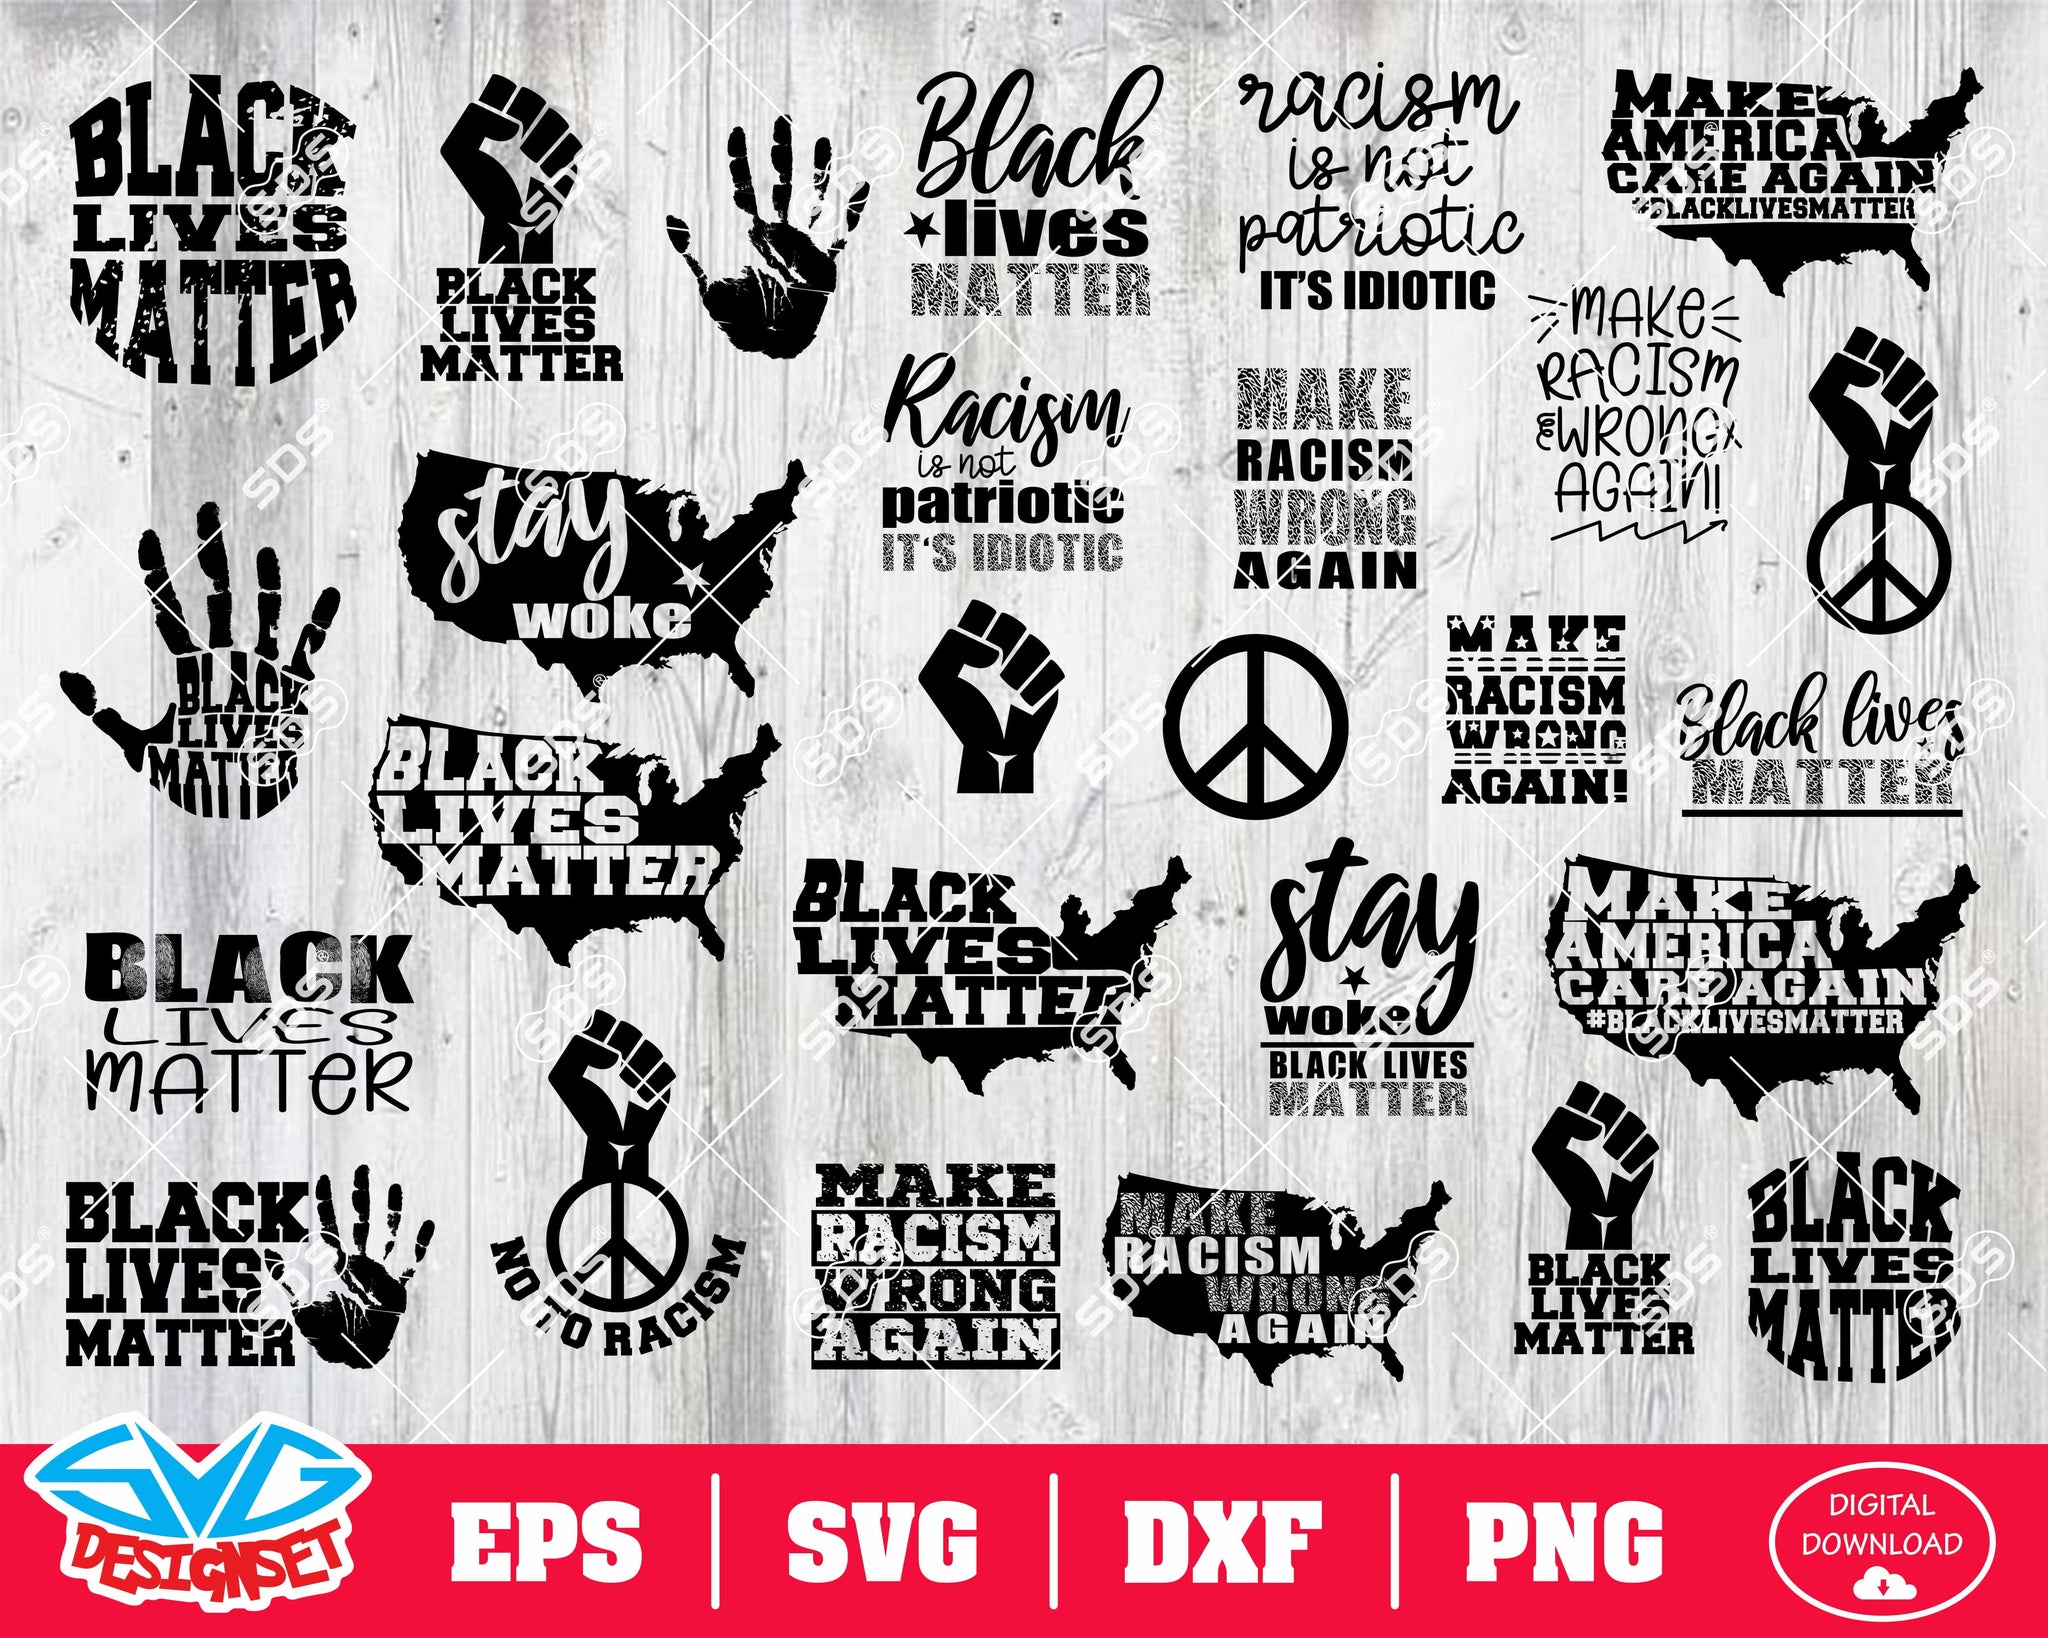 Black Lives Matter Bundle Svg, Dxf, Eps, Png, Clipart, Silhouette and Cutfiles #1 - SVGDesignSets